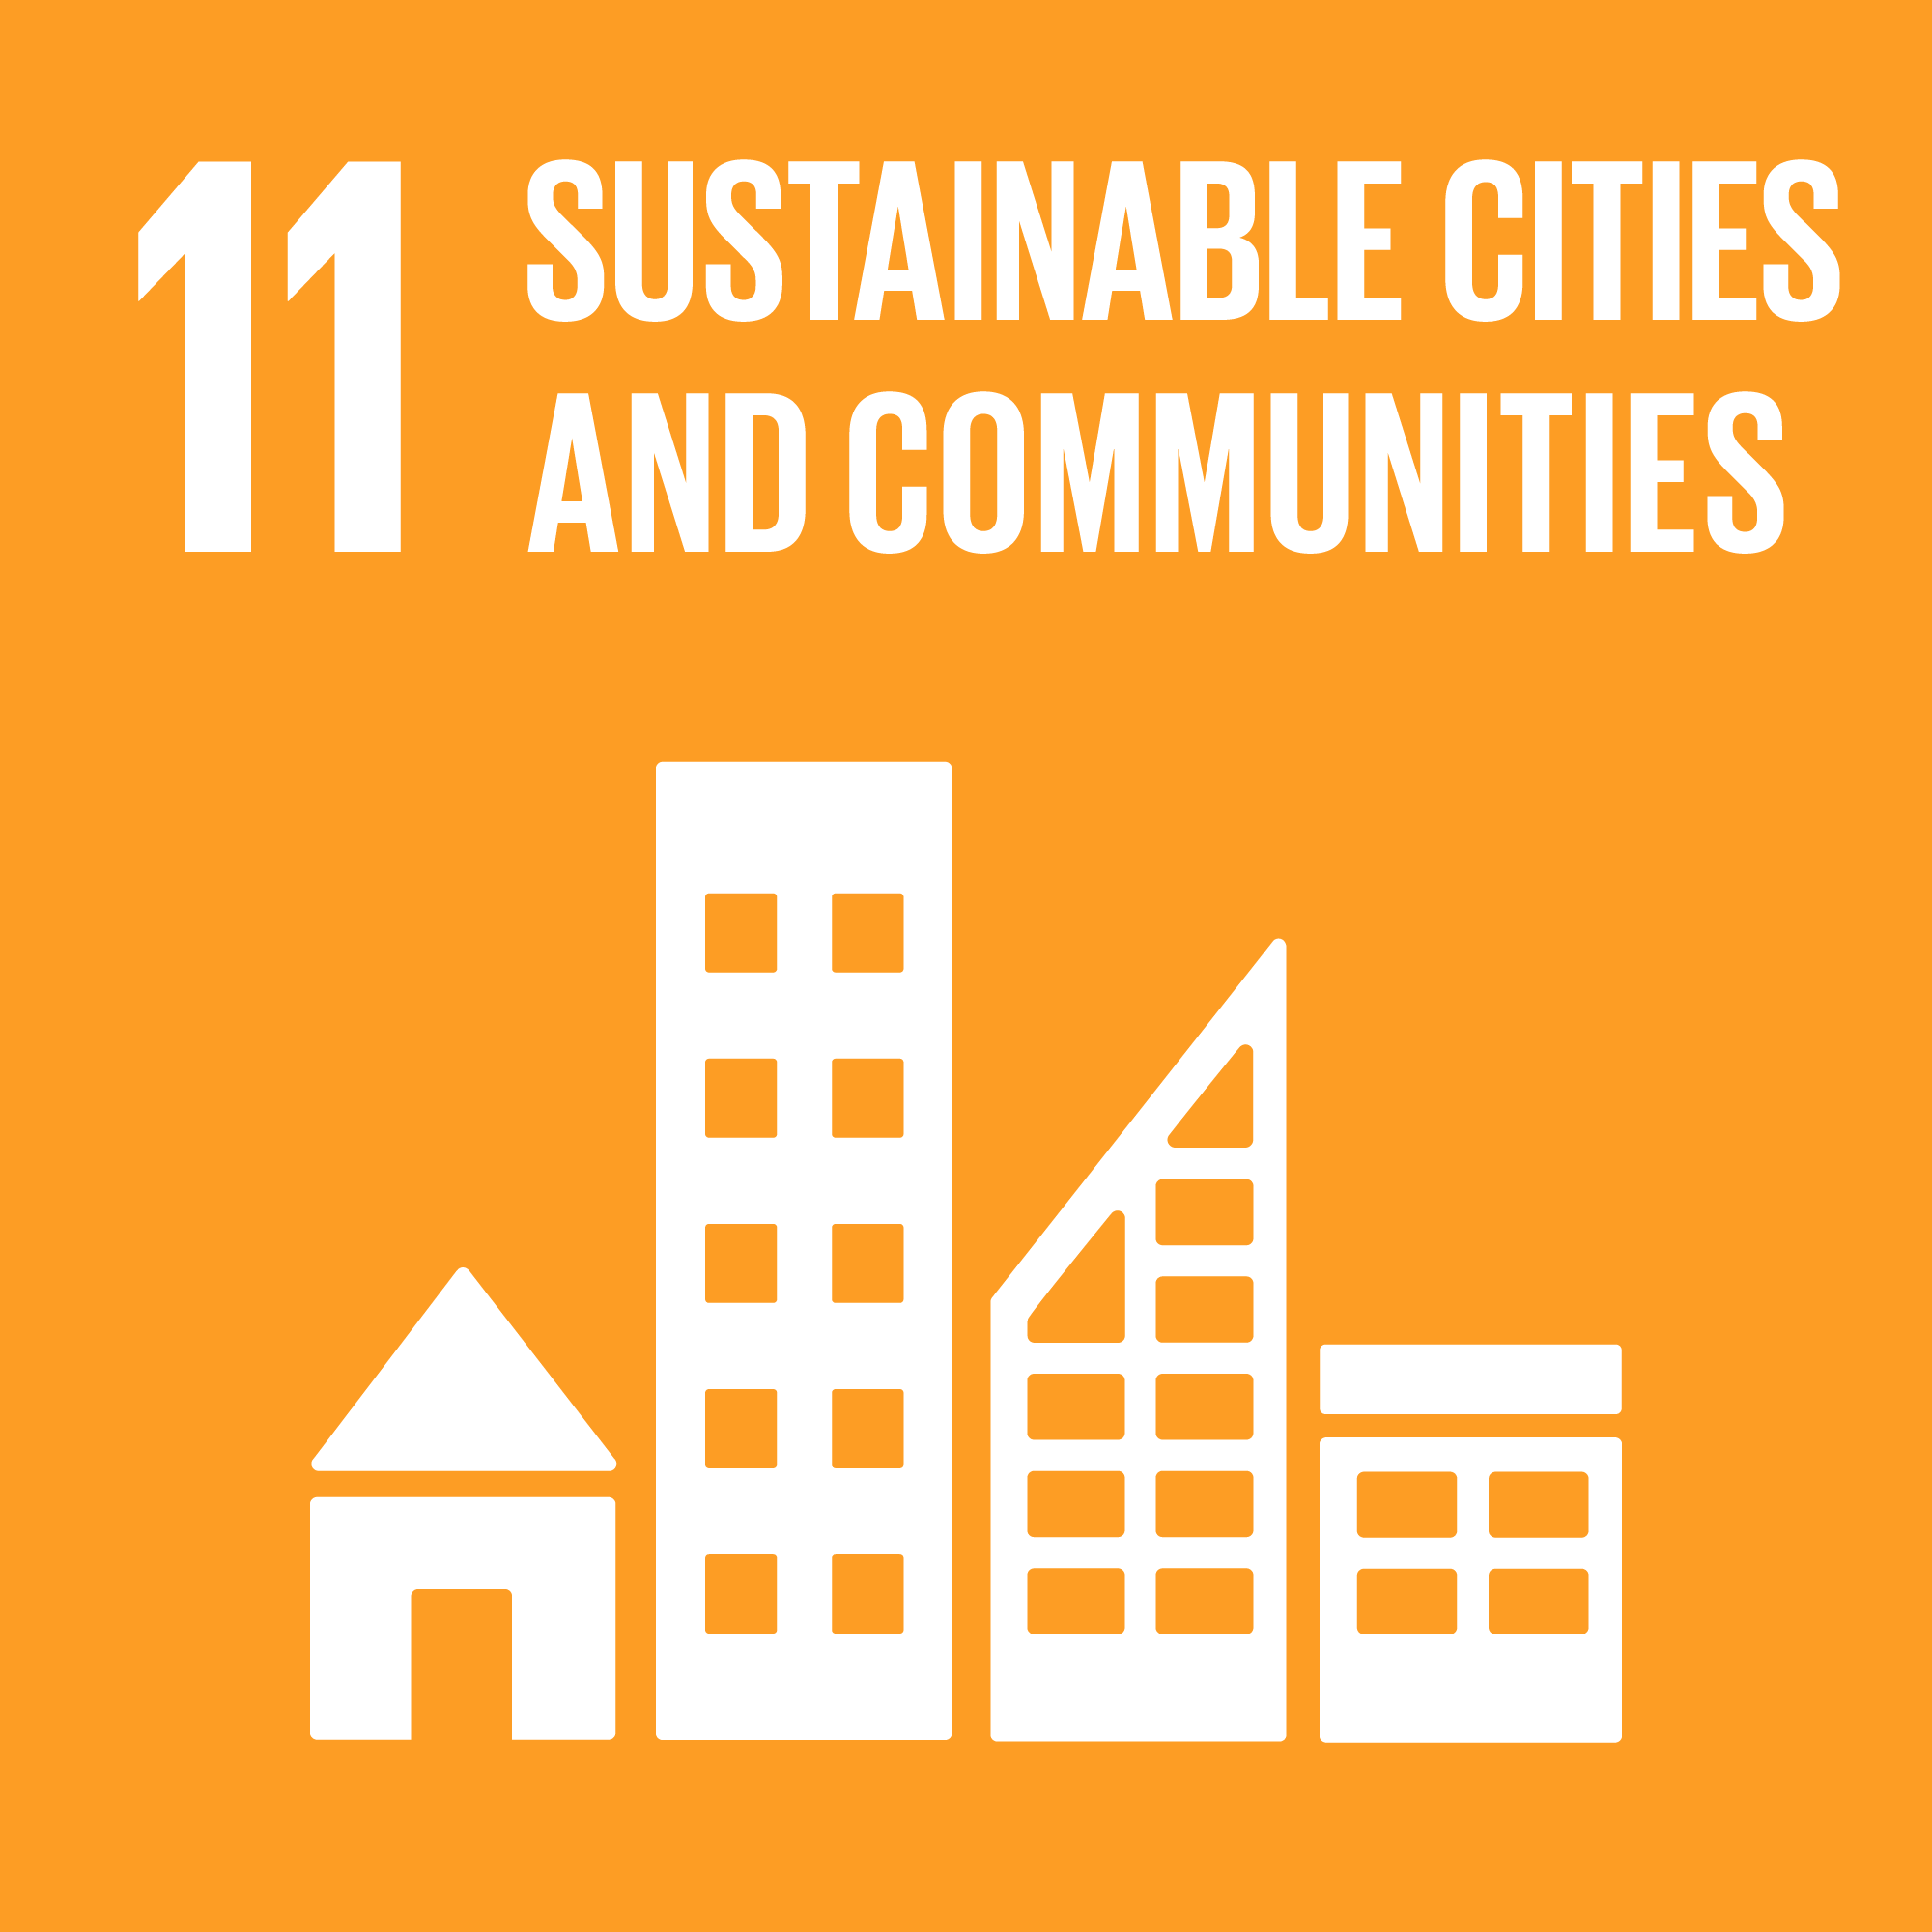 Goal 11: Sustainable Cities and Communities - Make cities and human settlements inclusive, safe, resilient and sustainable